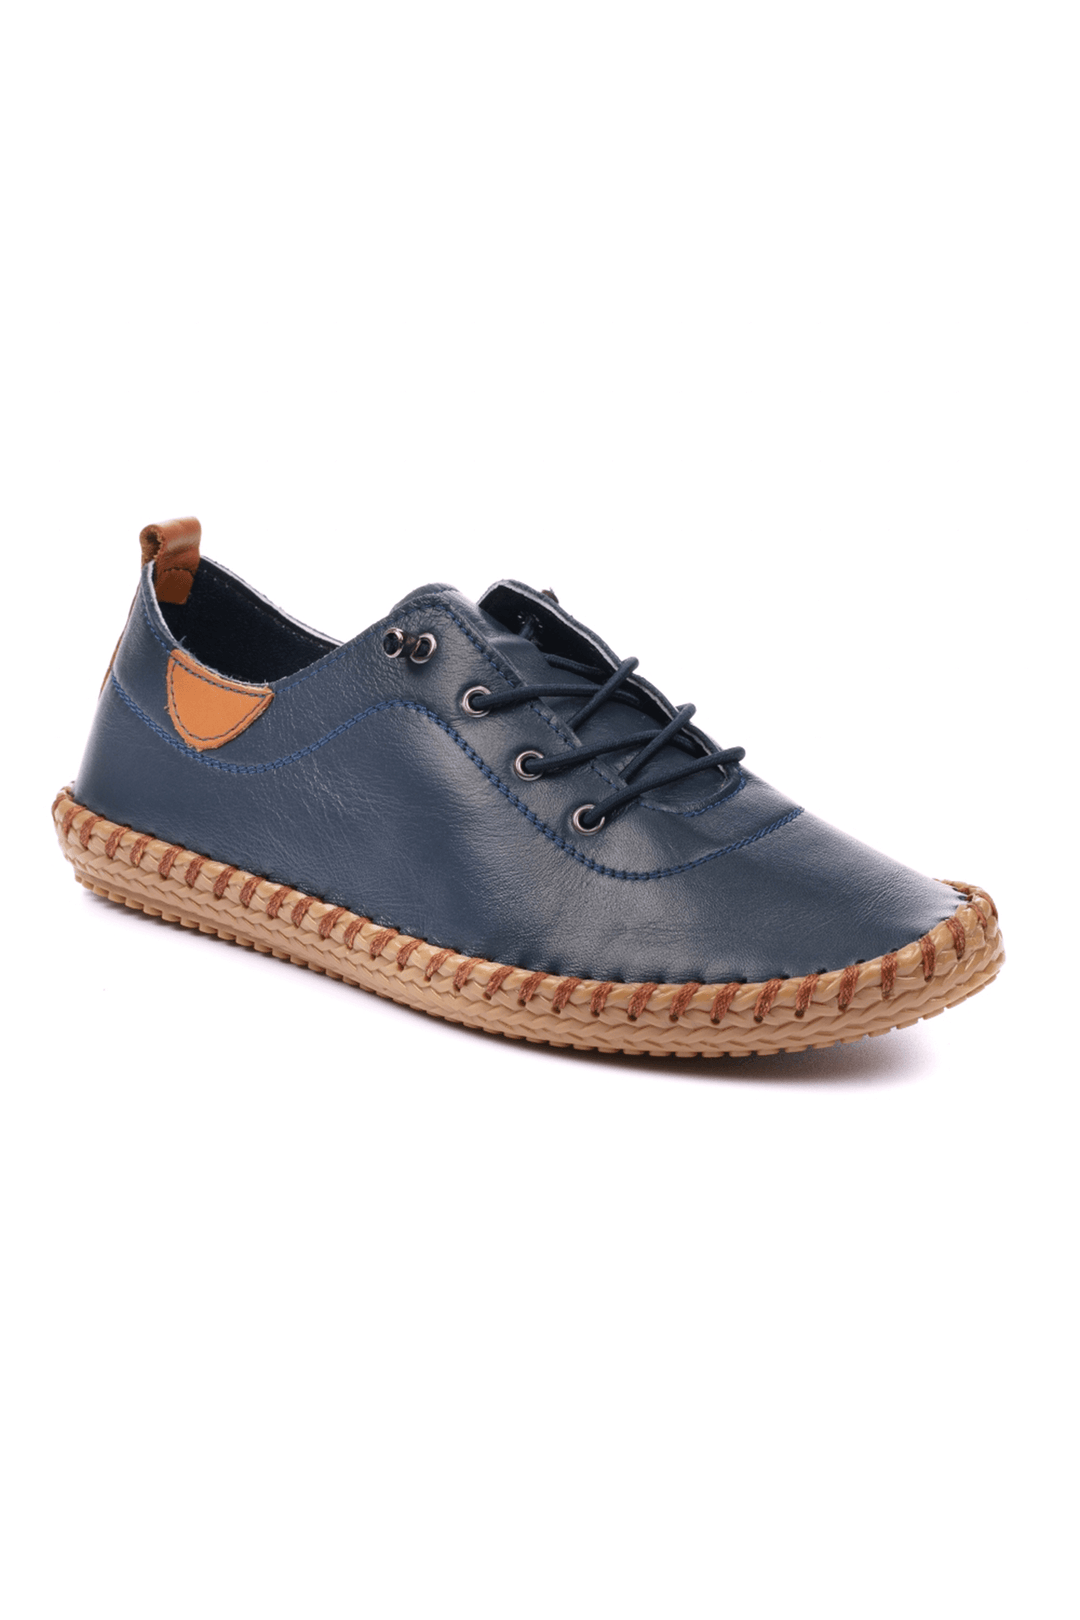 Lunar Whitstable FLG019 Leather Navy Plimsoll - Shirley Allum Boutique